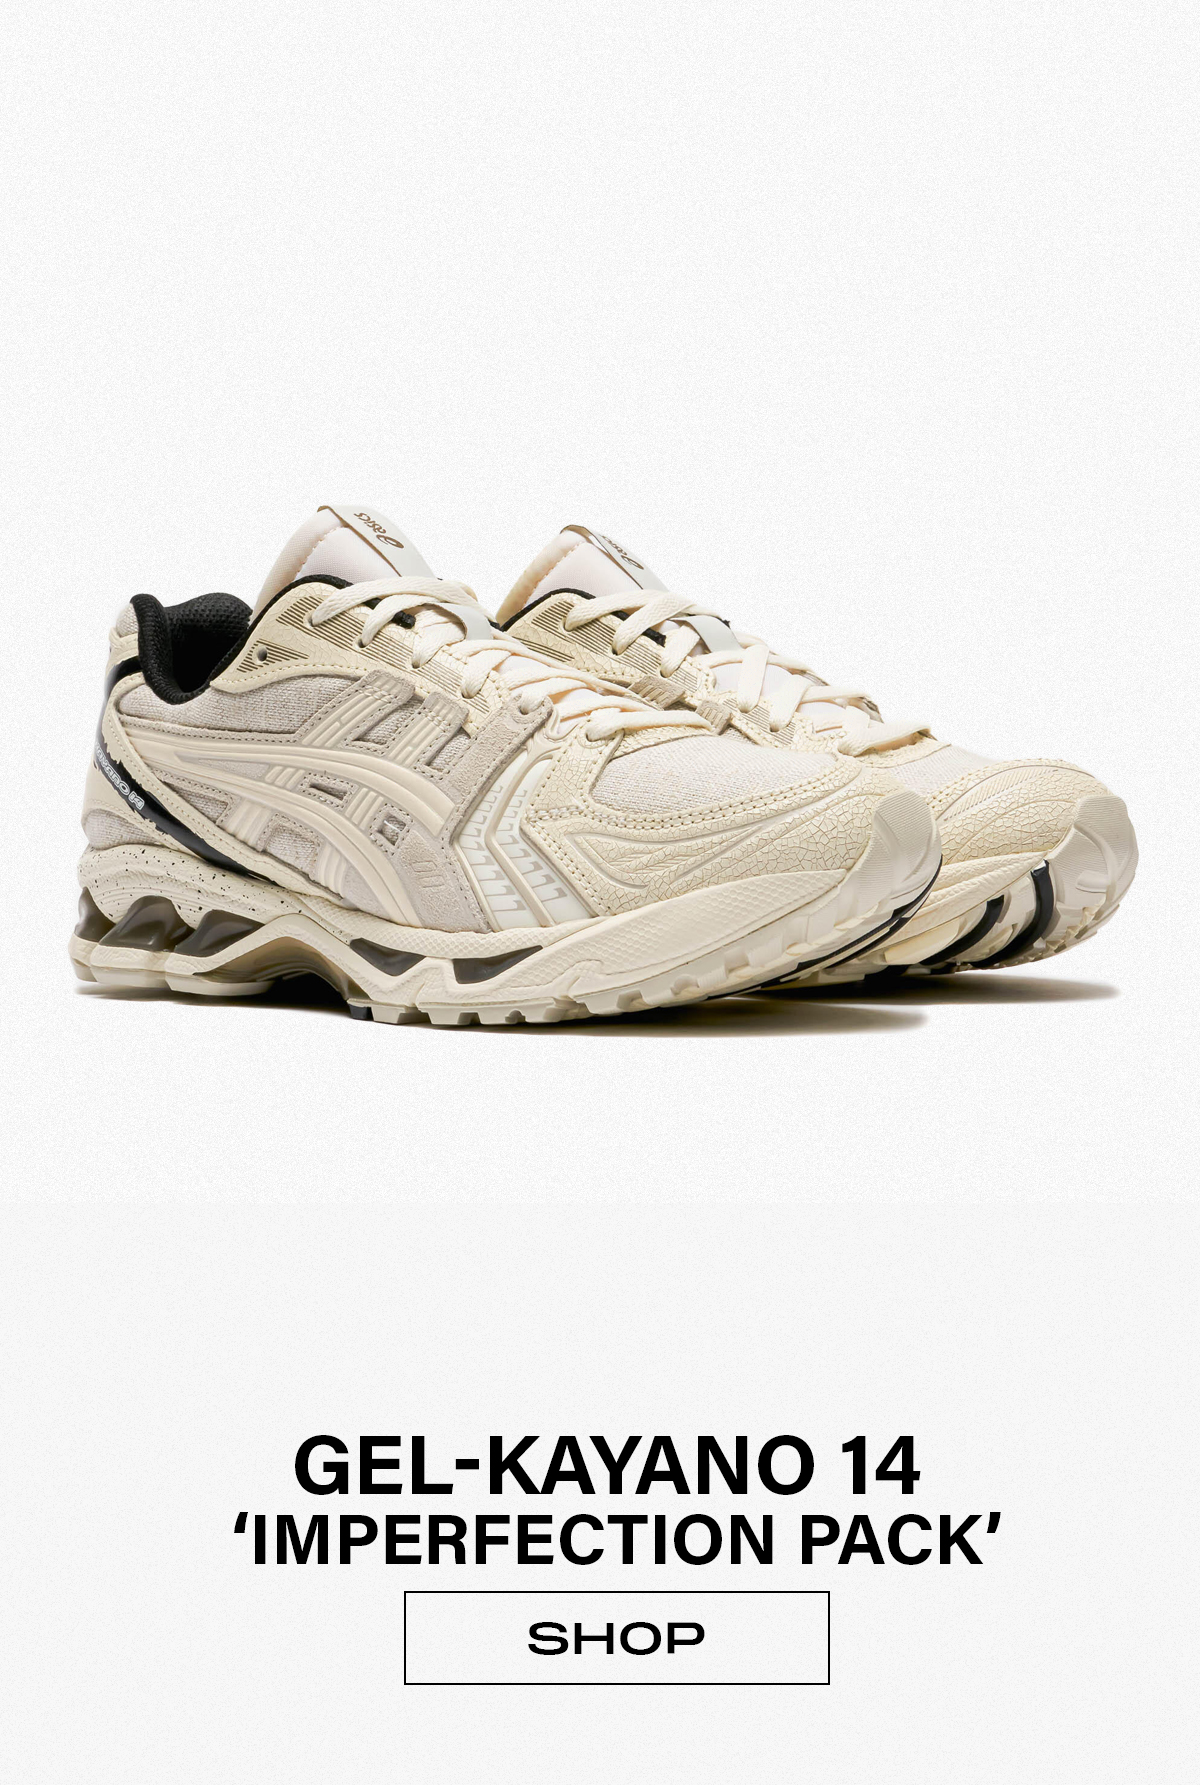 KAYANO-14 IMPERFECTION PACK